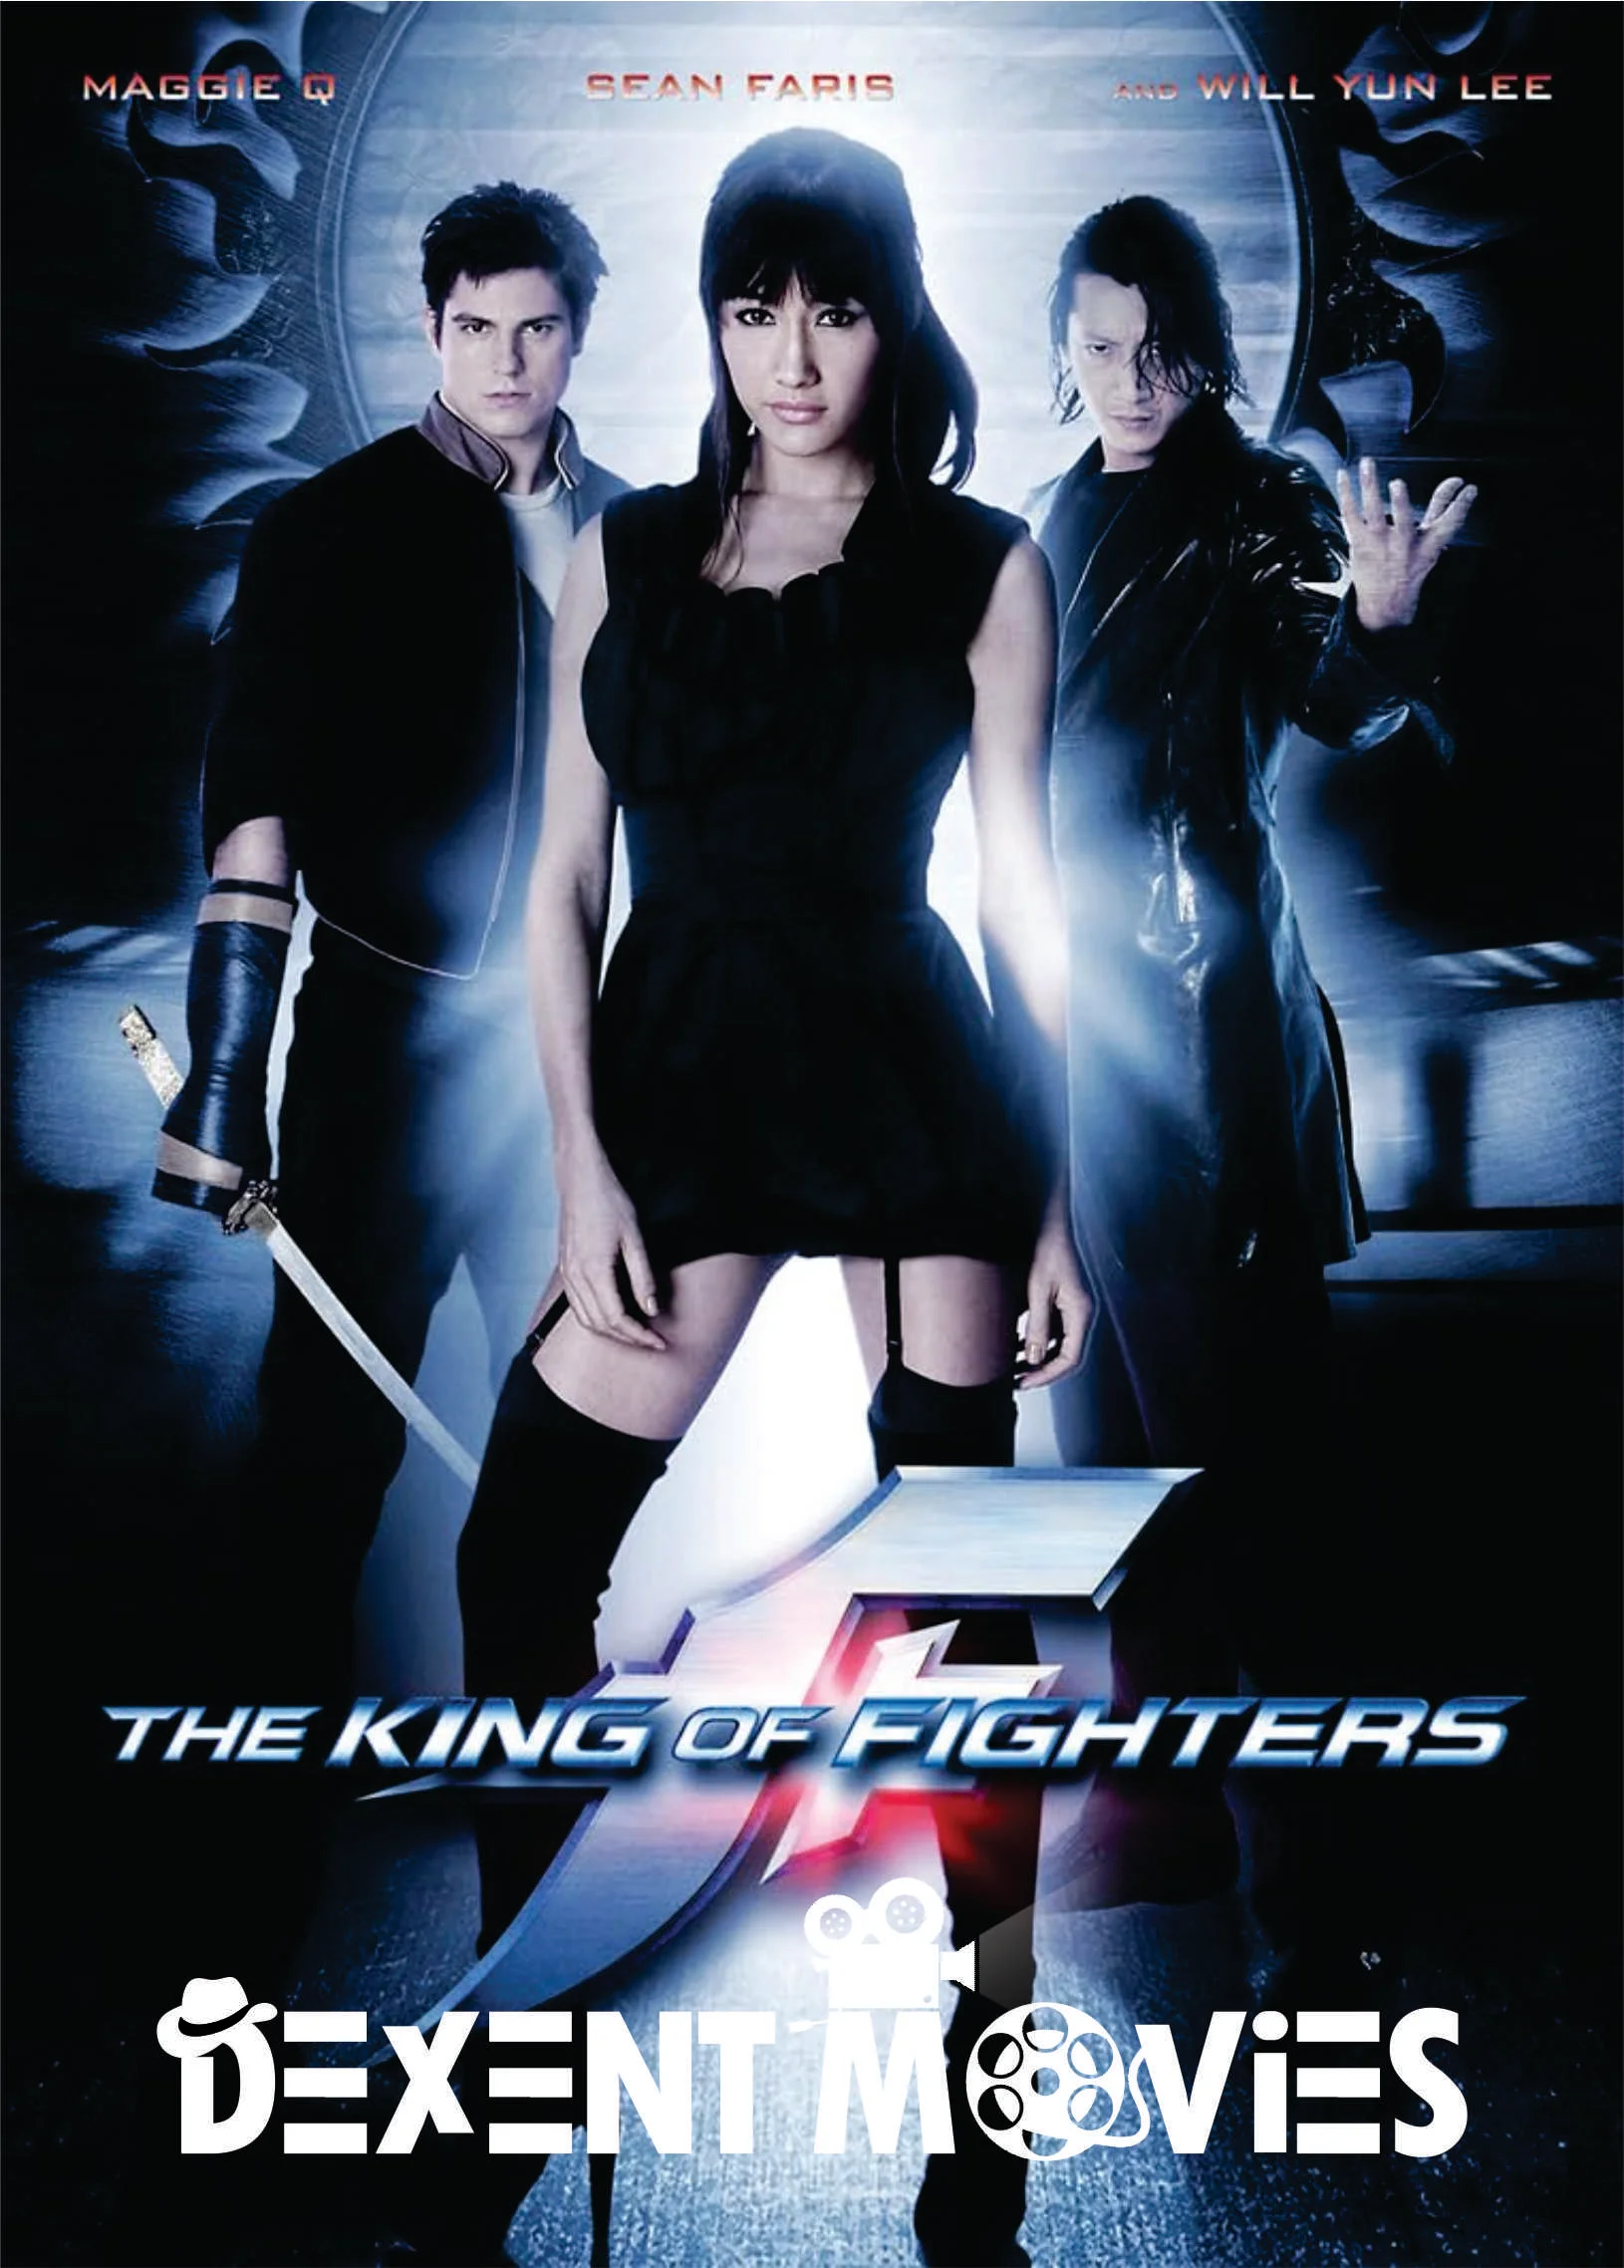 The King of fighters